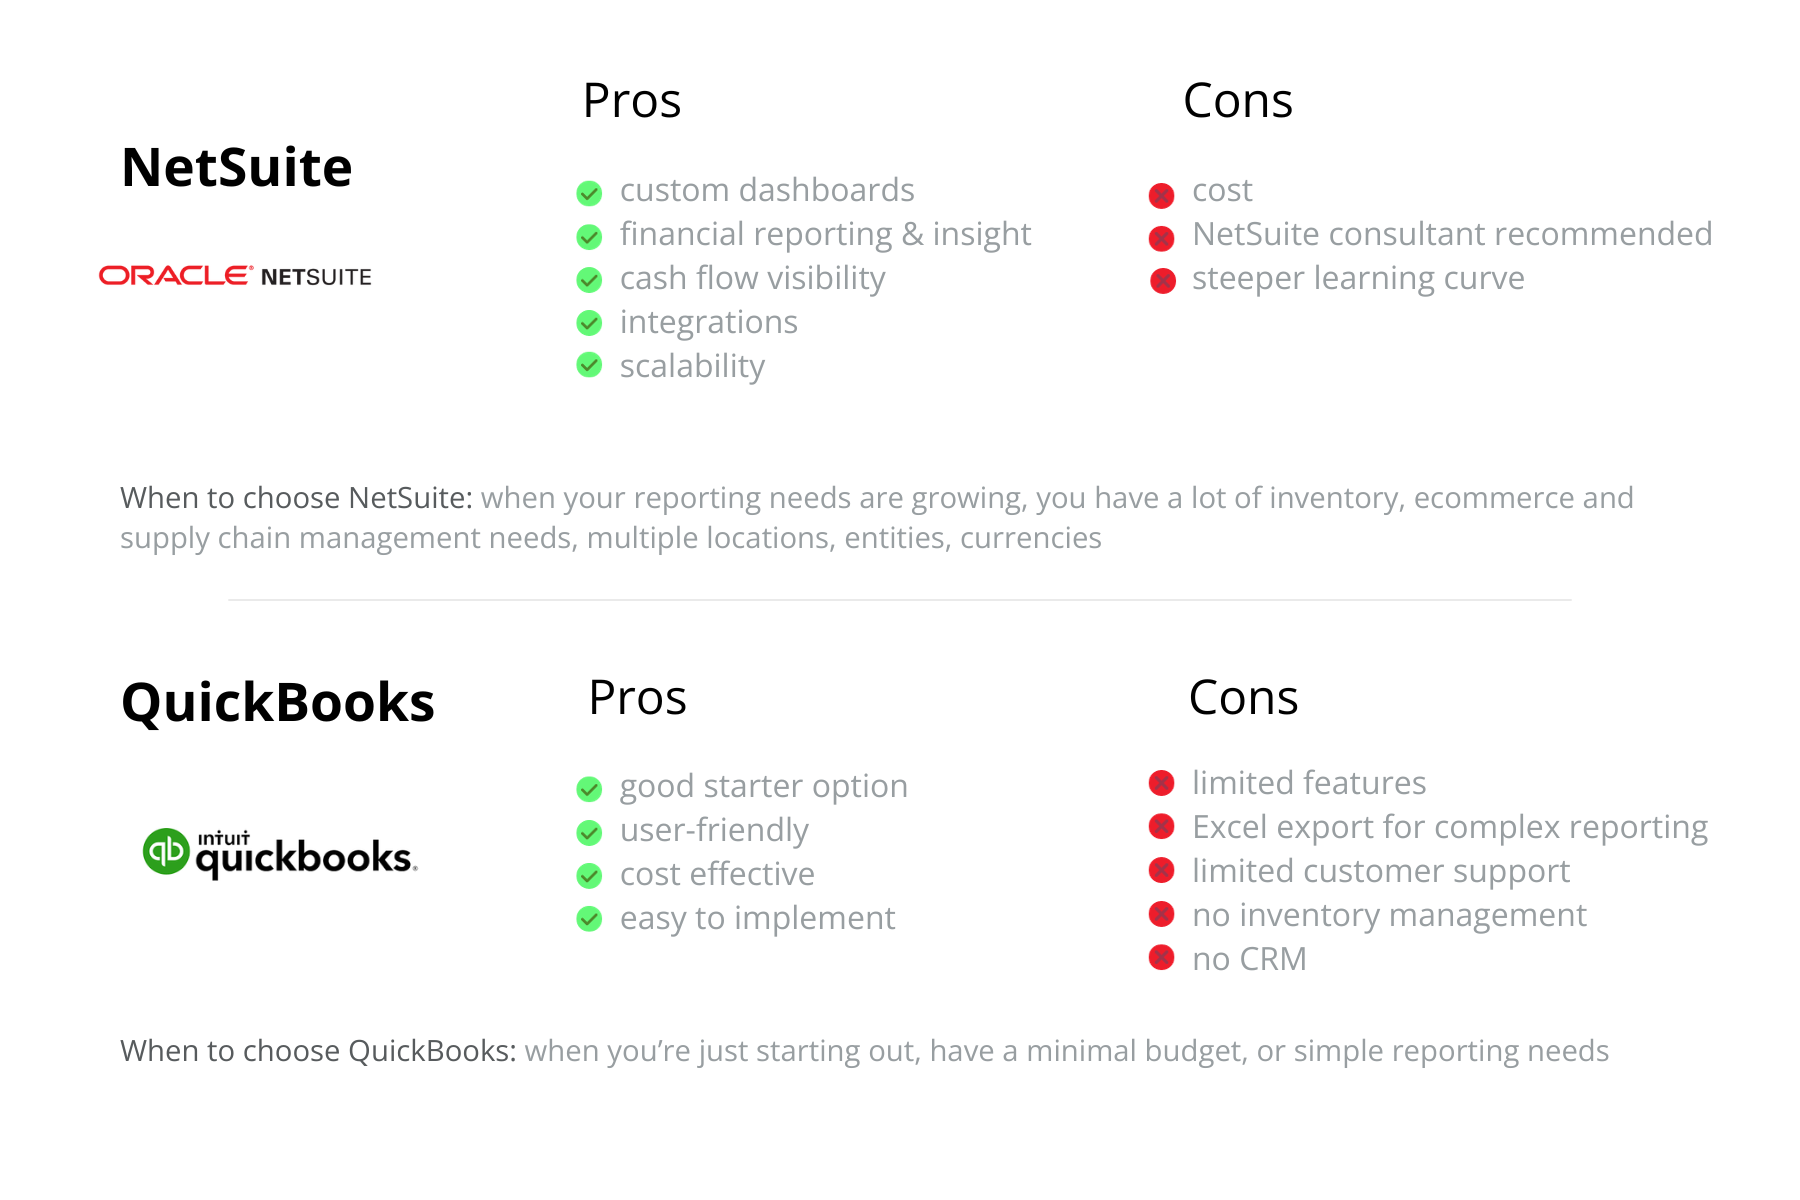 NetSuite vs. QuickBooks pros and cons and when to choose each.